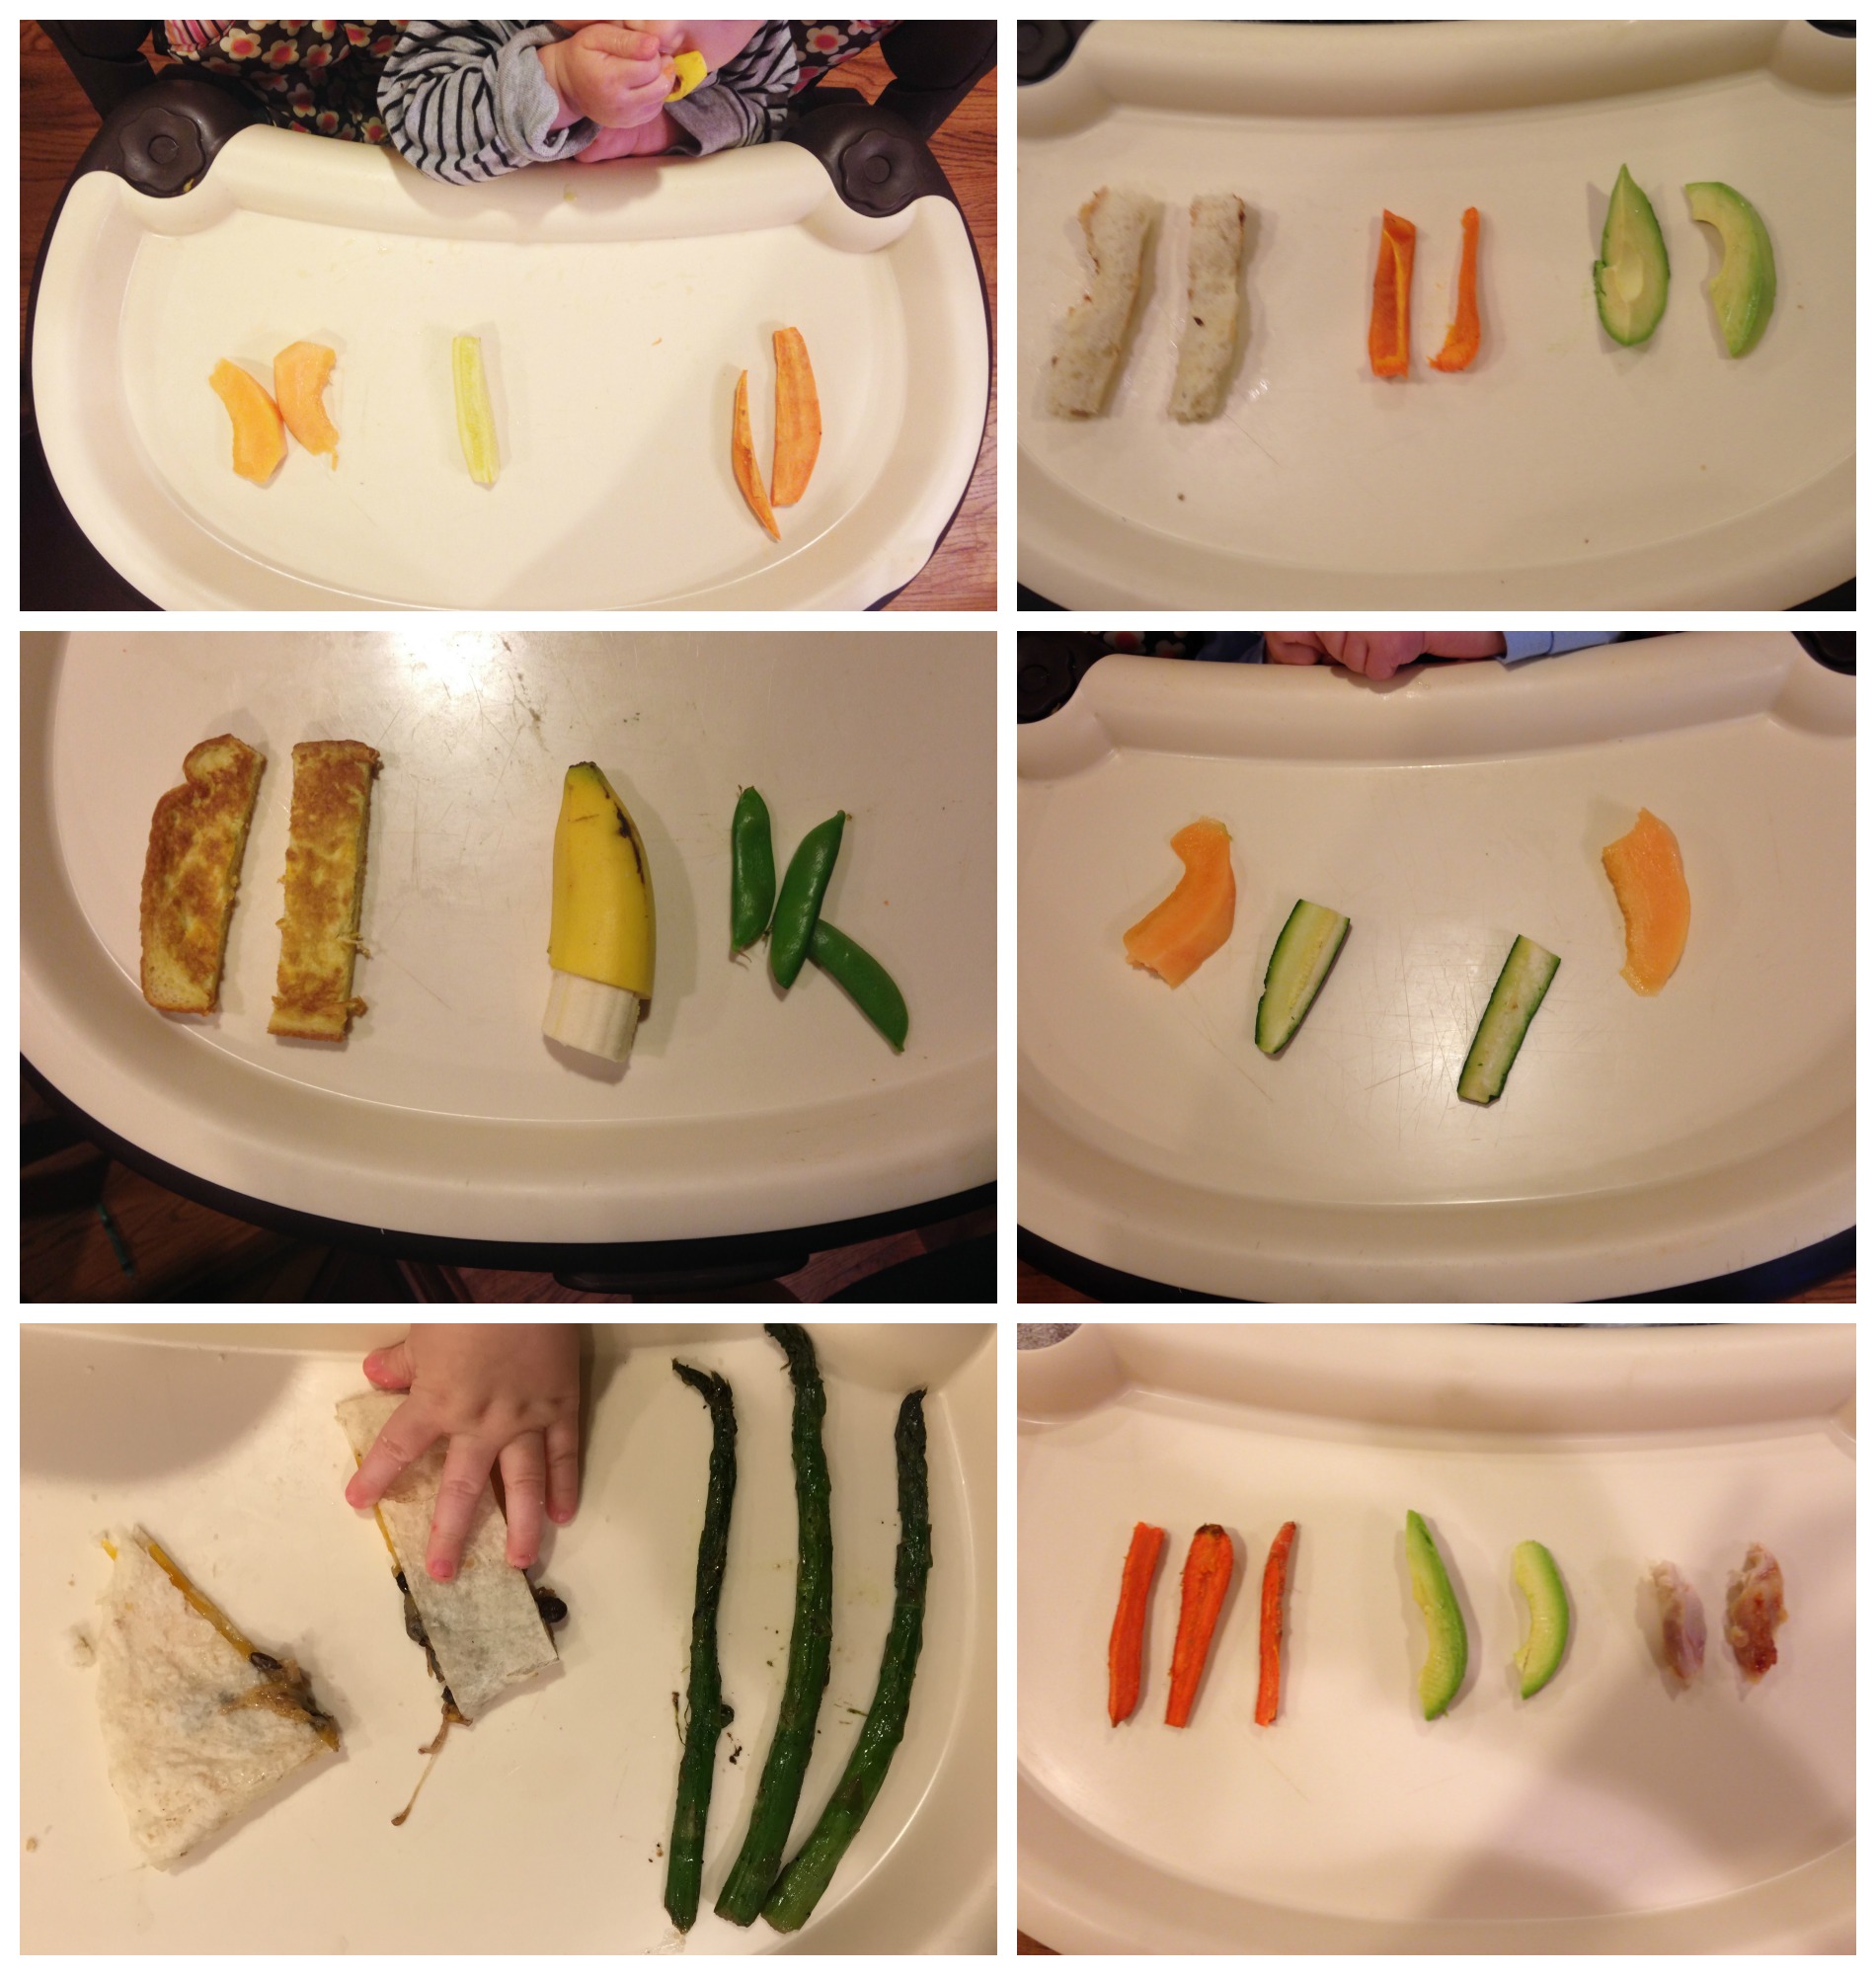 How We Meal Prep for Baby Led Weaning